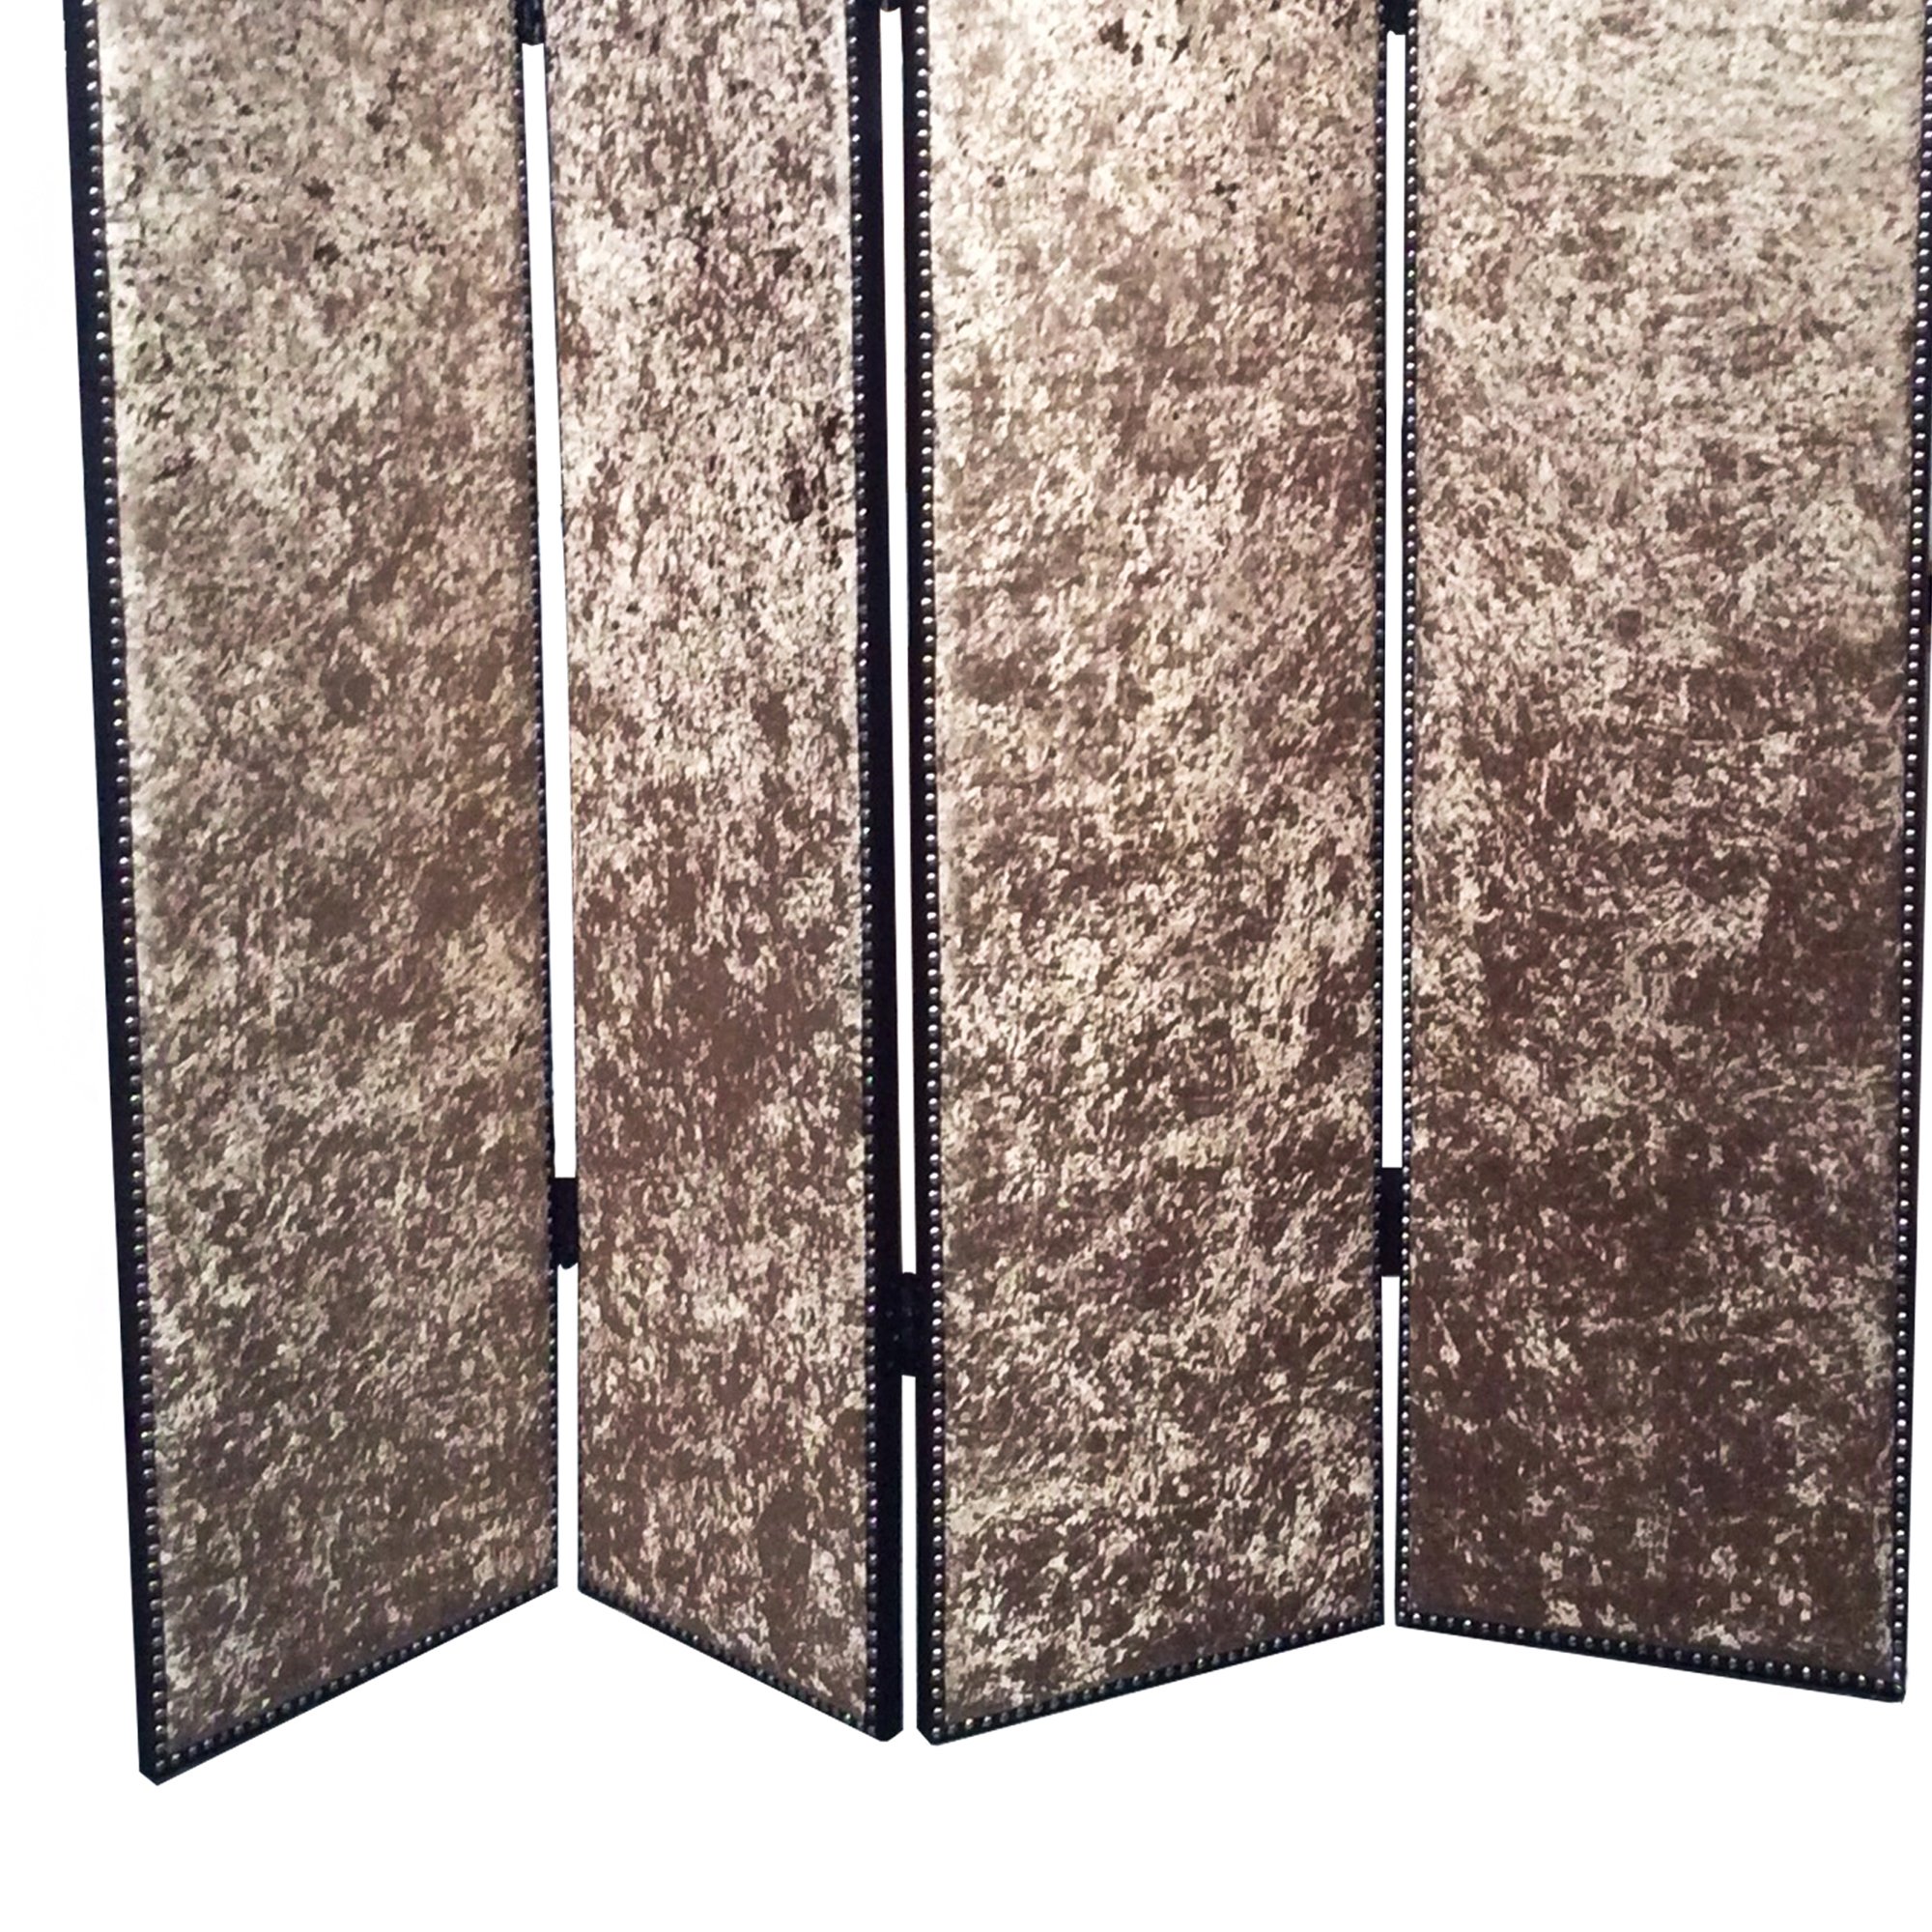 Wood And Fabric 4 Panel Foldable Screen With Textured Details, Brown- Saltoro Sherpi